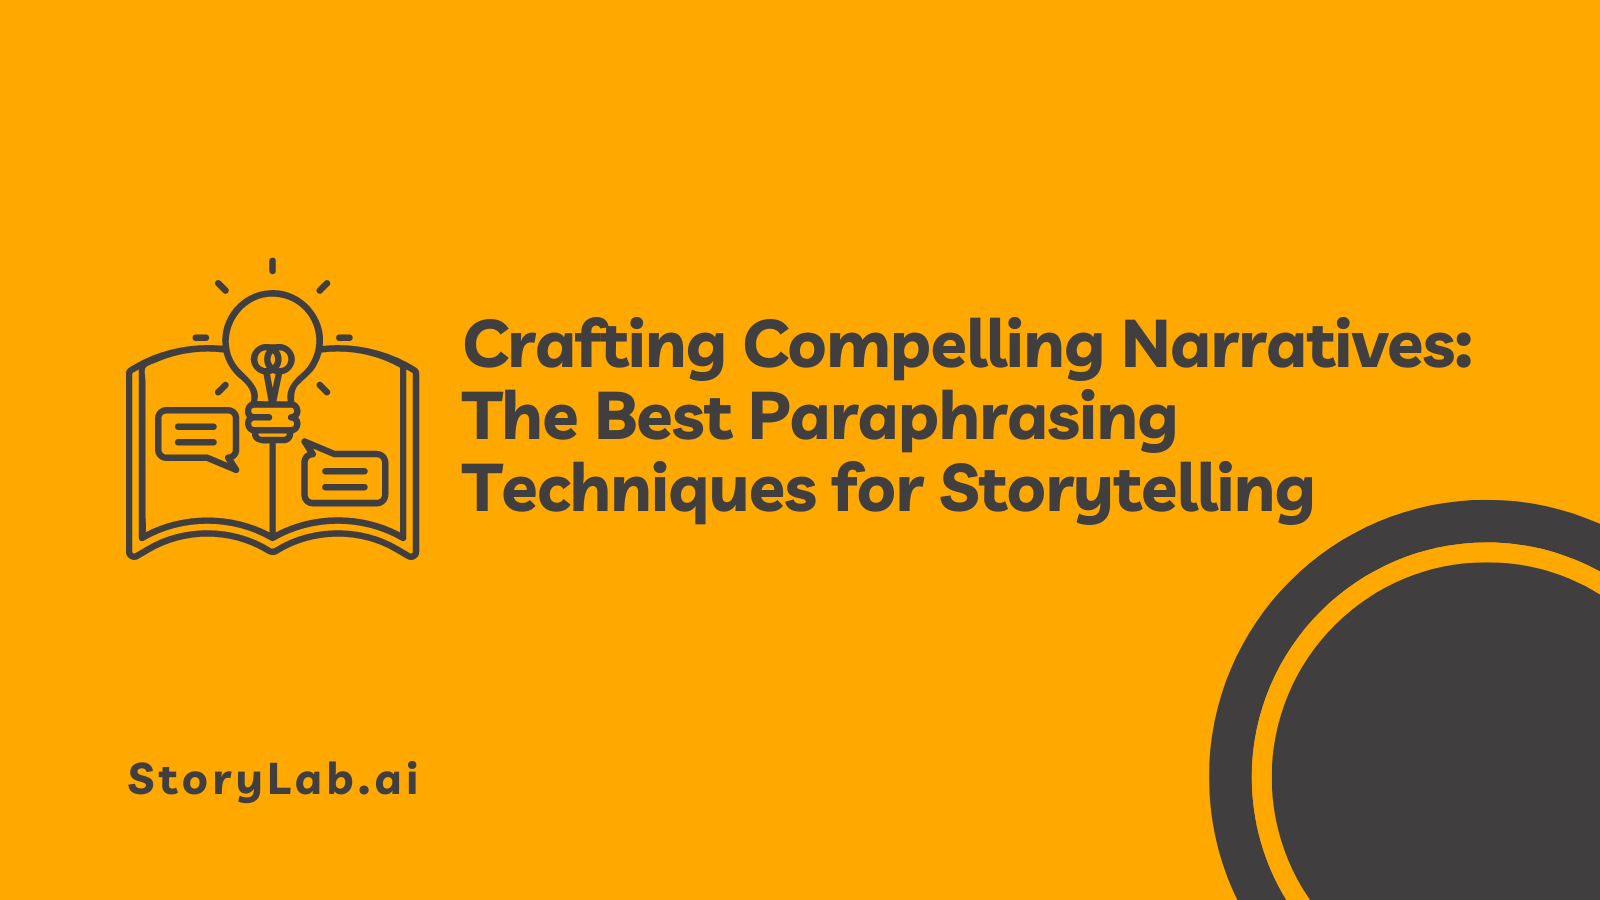 Crafting Compelling Narratives: The Best Paraphrasing Techniques for Storytelling